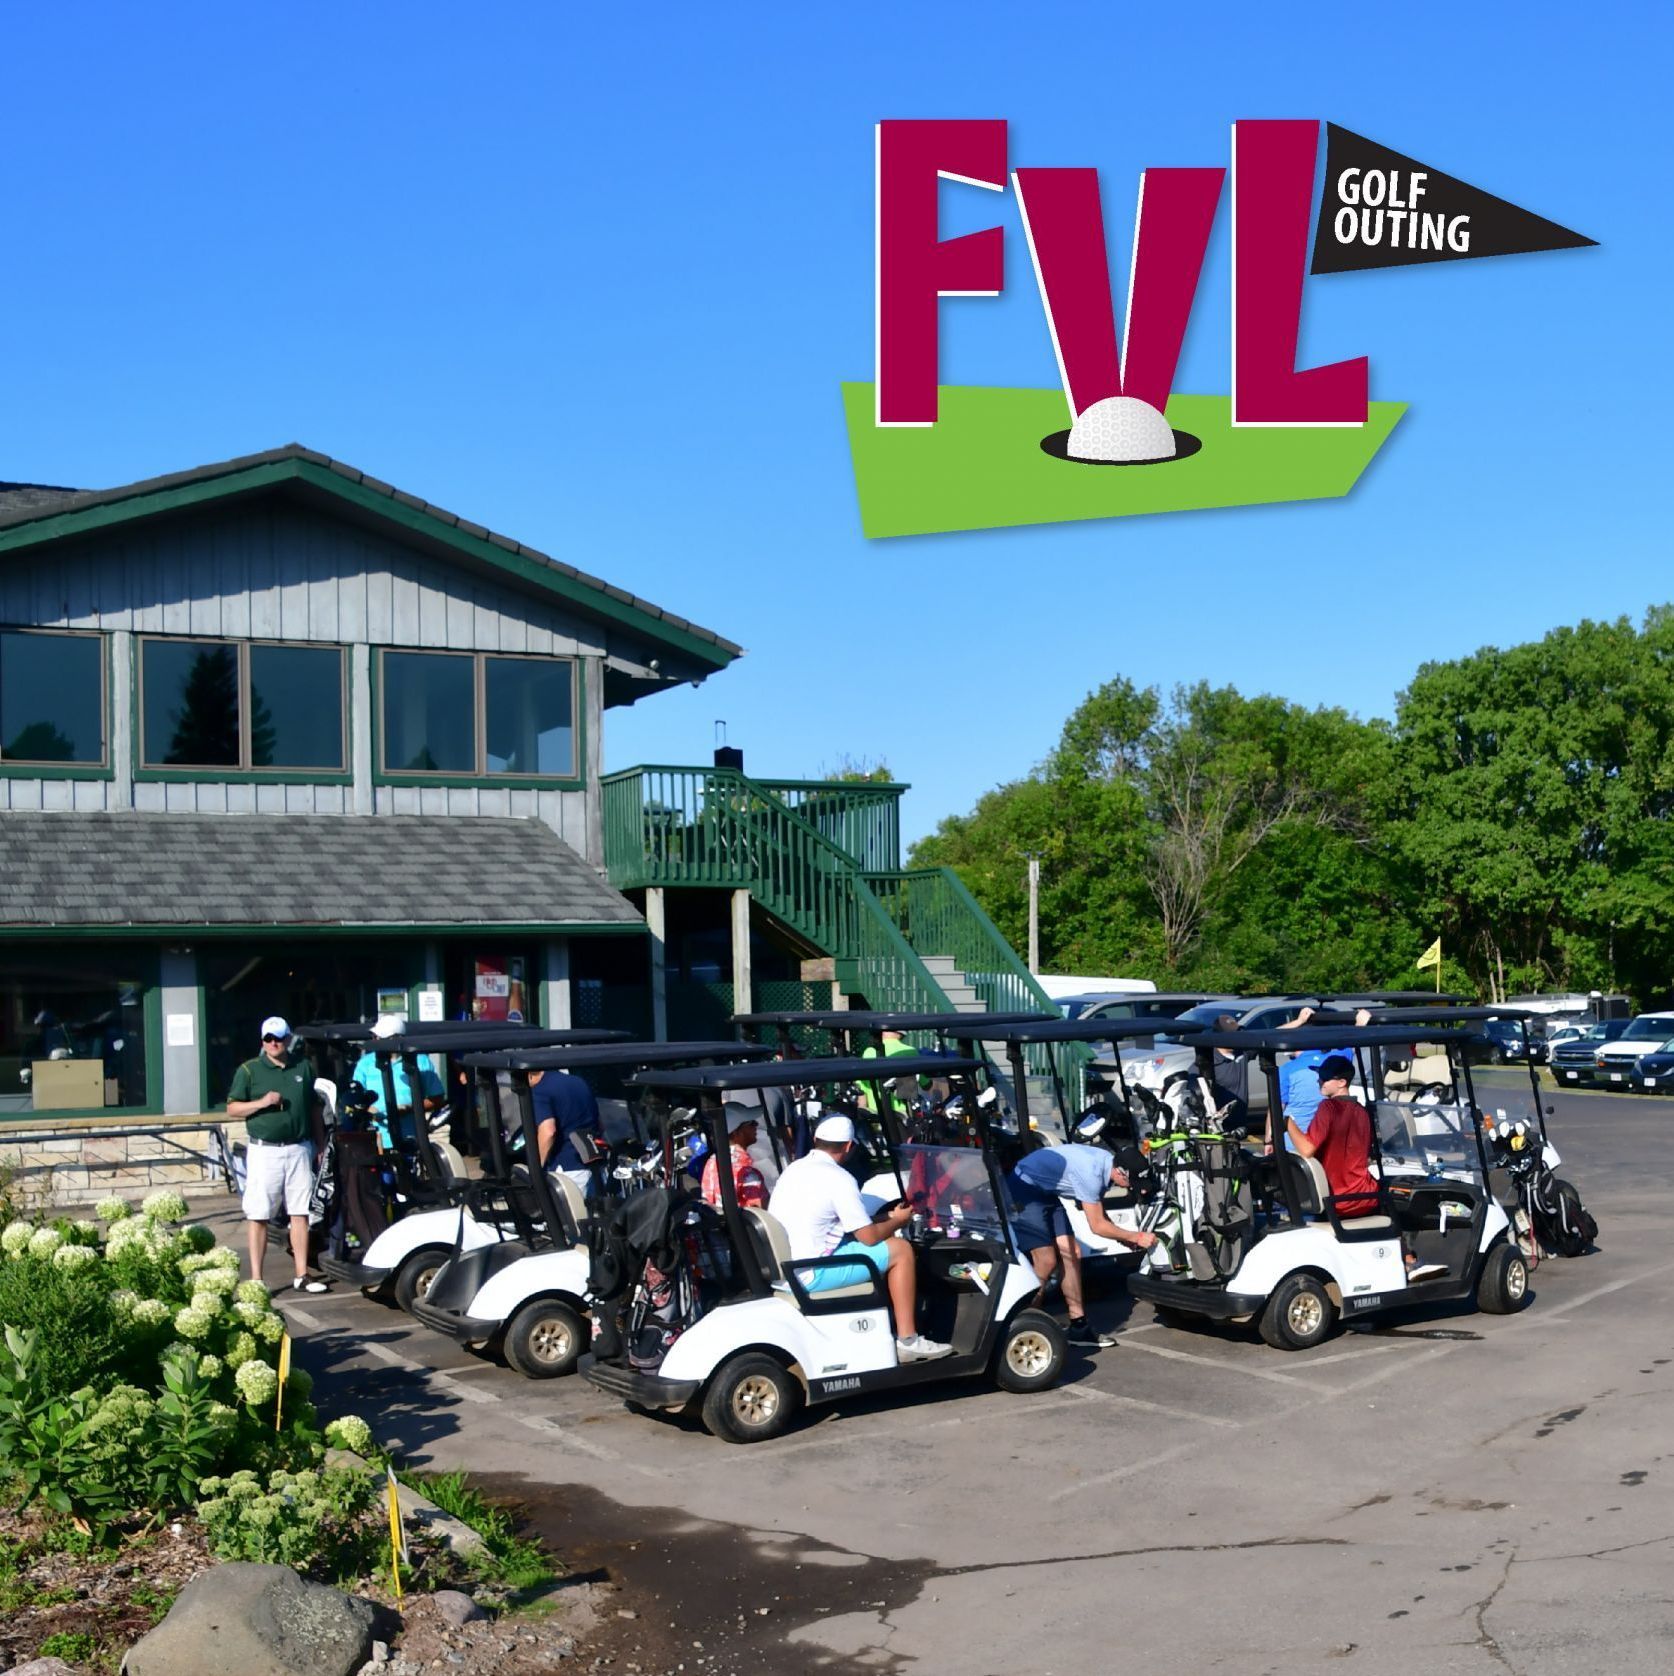 High Cliff Golf Course clubhouse with golf cards in front and the FVL Golf Outing logo in the top right corner